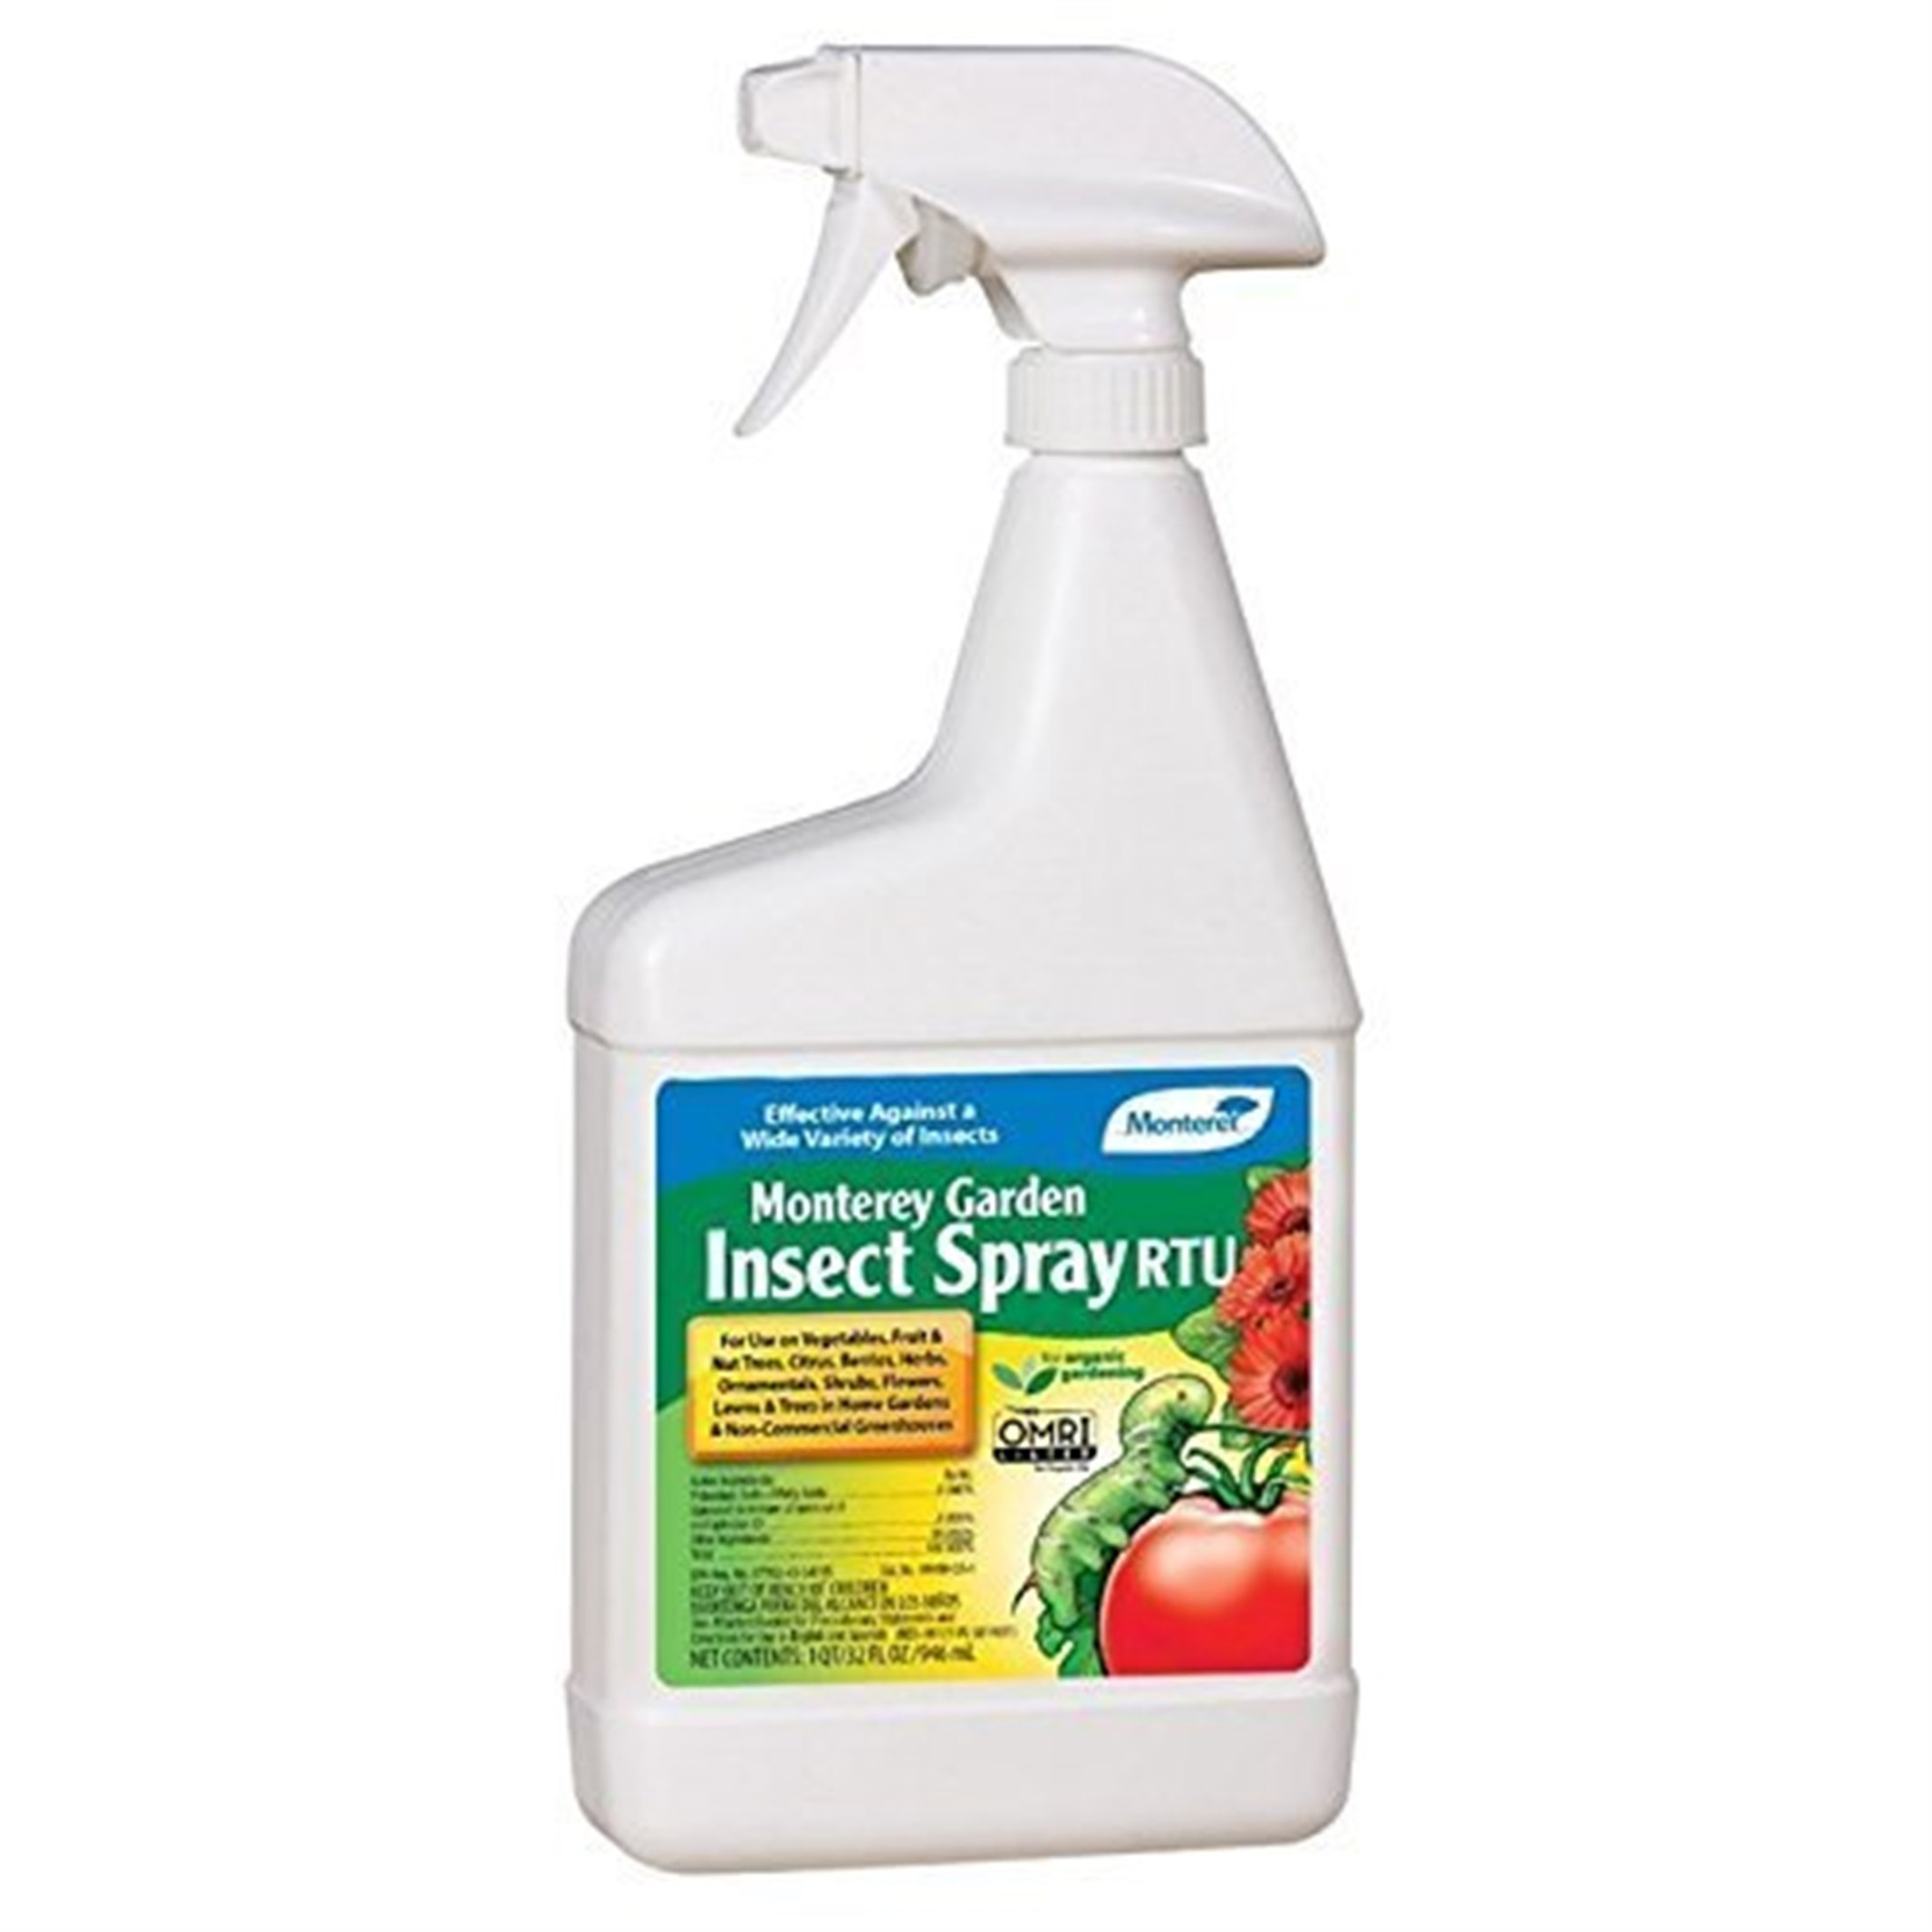 Monterey Garden Insect Spray with Spinosad, 32 oz